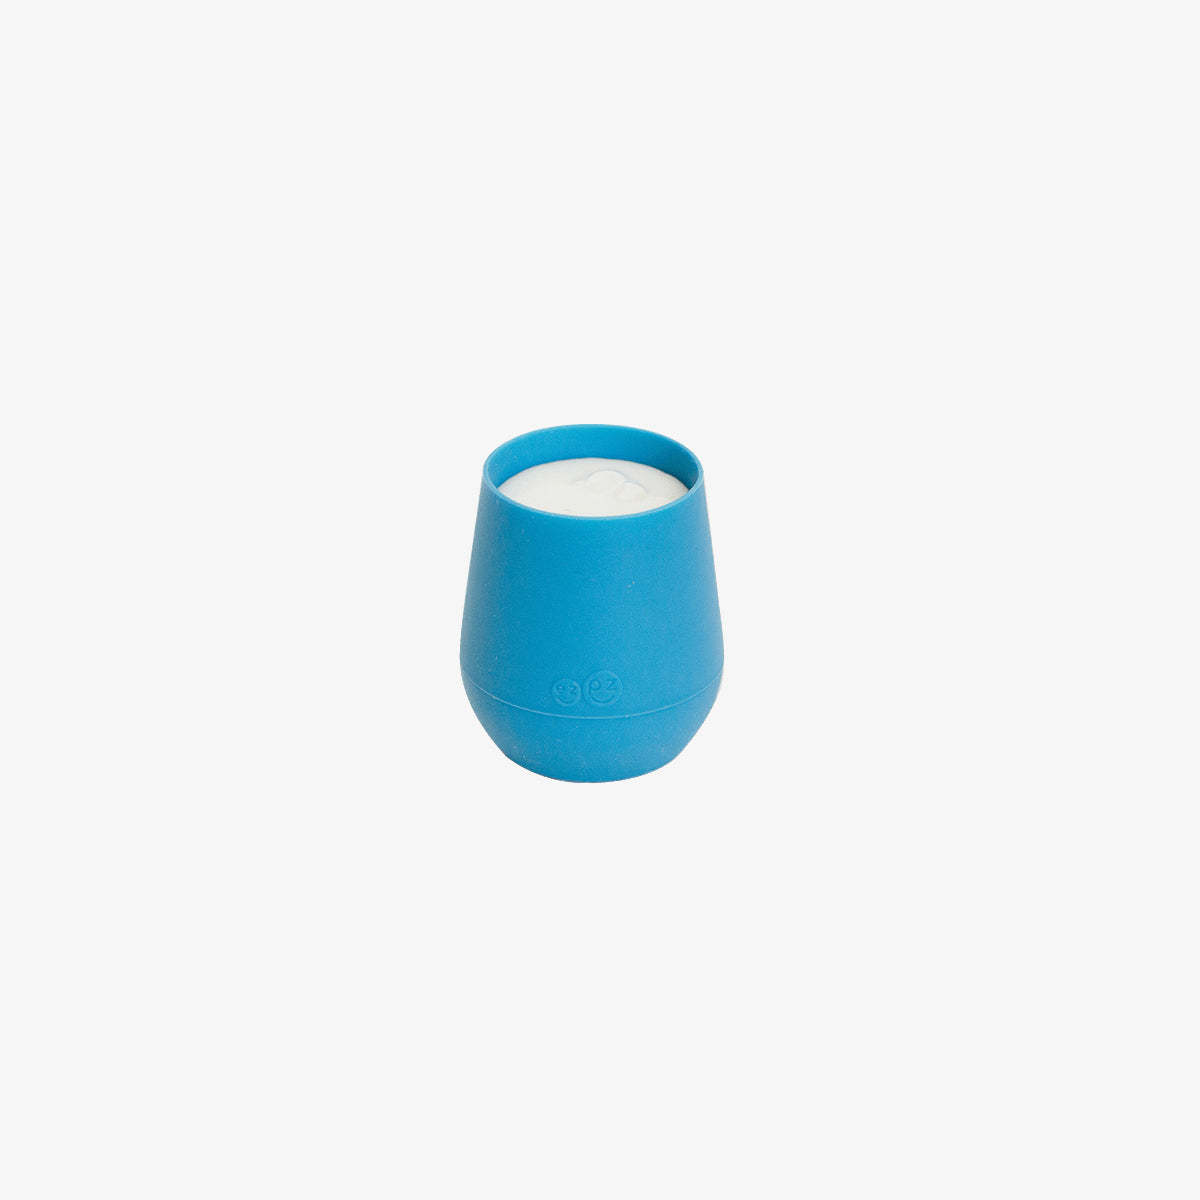 The Tiny Cup in Blue by ezpz / Open-Top, Silicone Drinking Cup for Babies